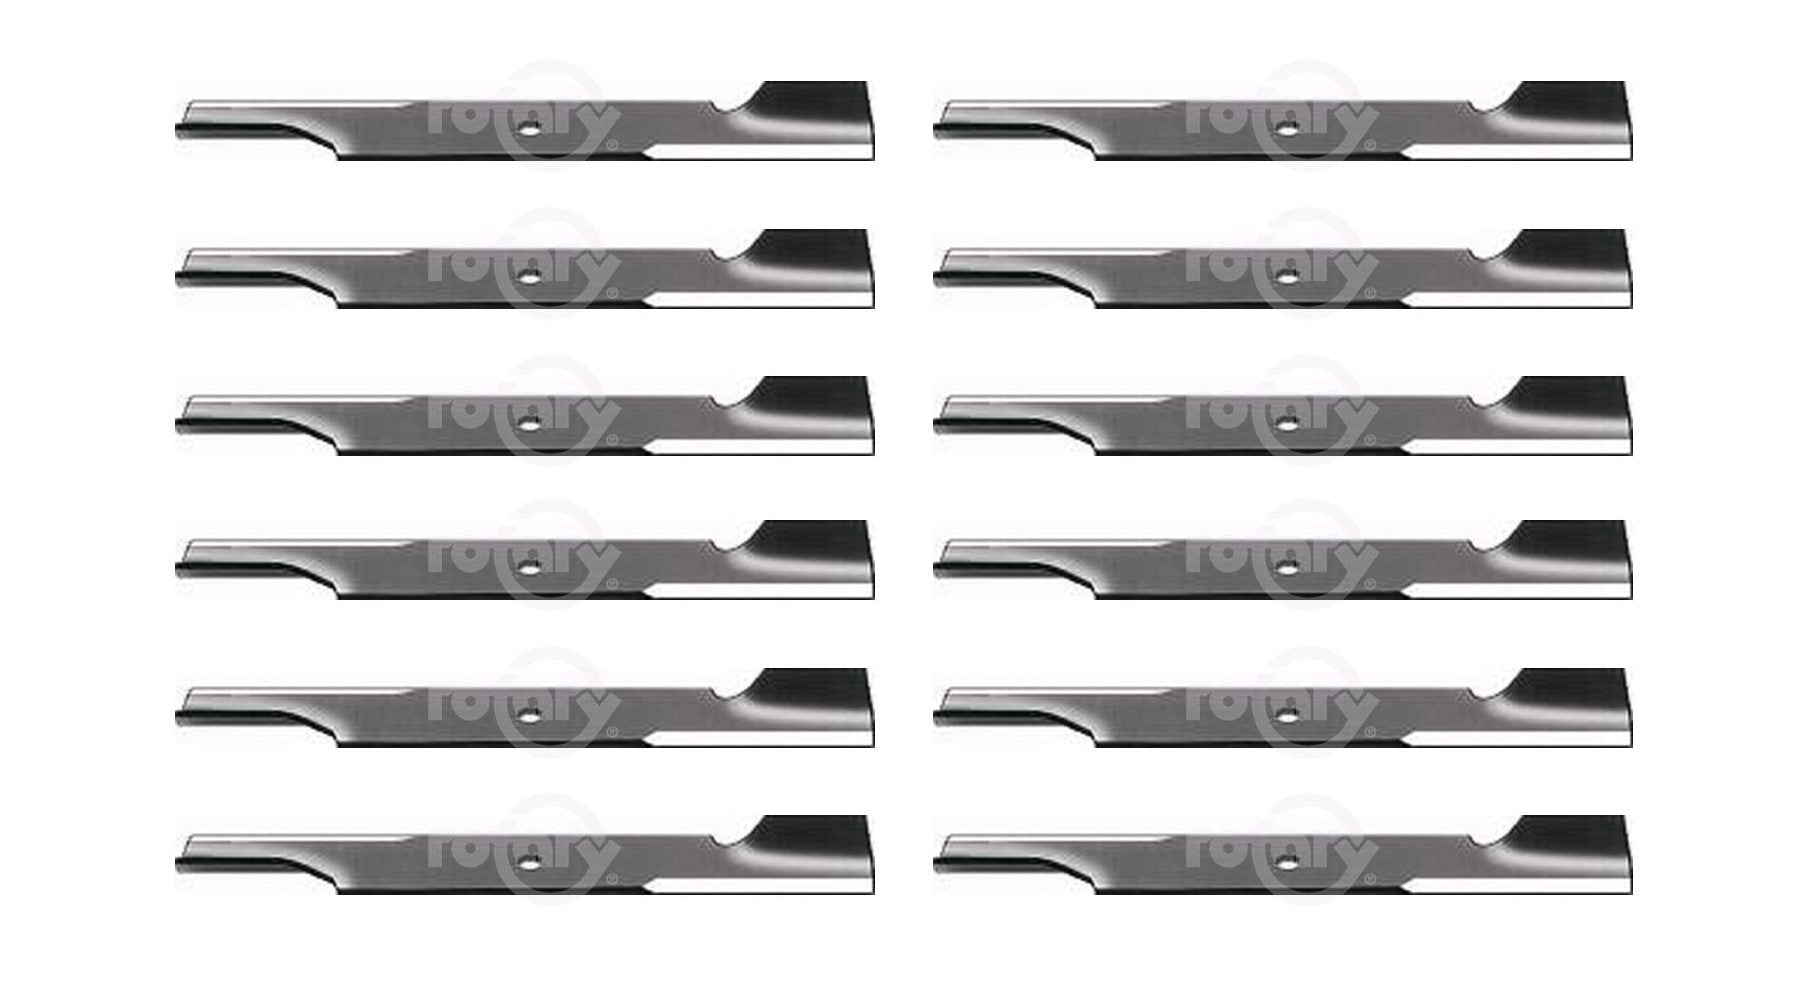 12 Pack Rotary 6026 Lawn Mower Blade Fits Scag 48112 481709 482882